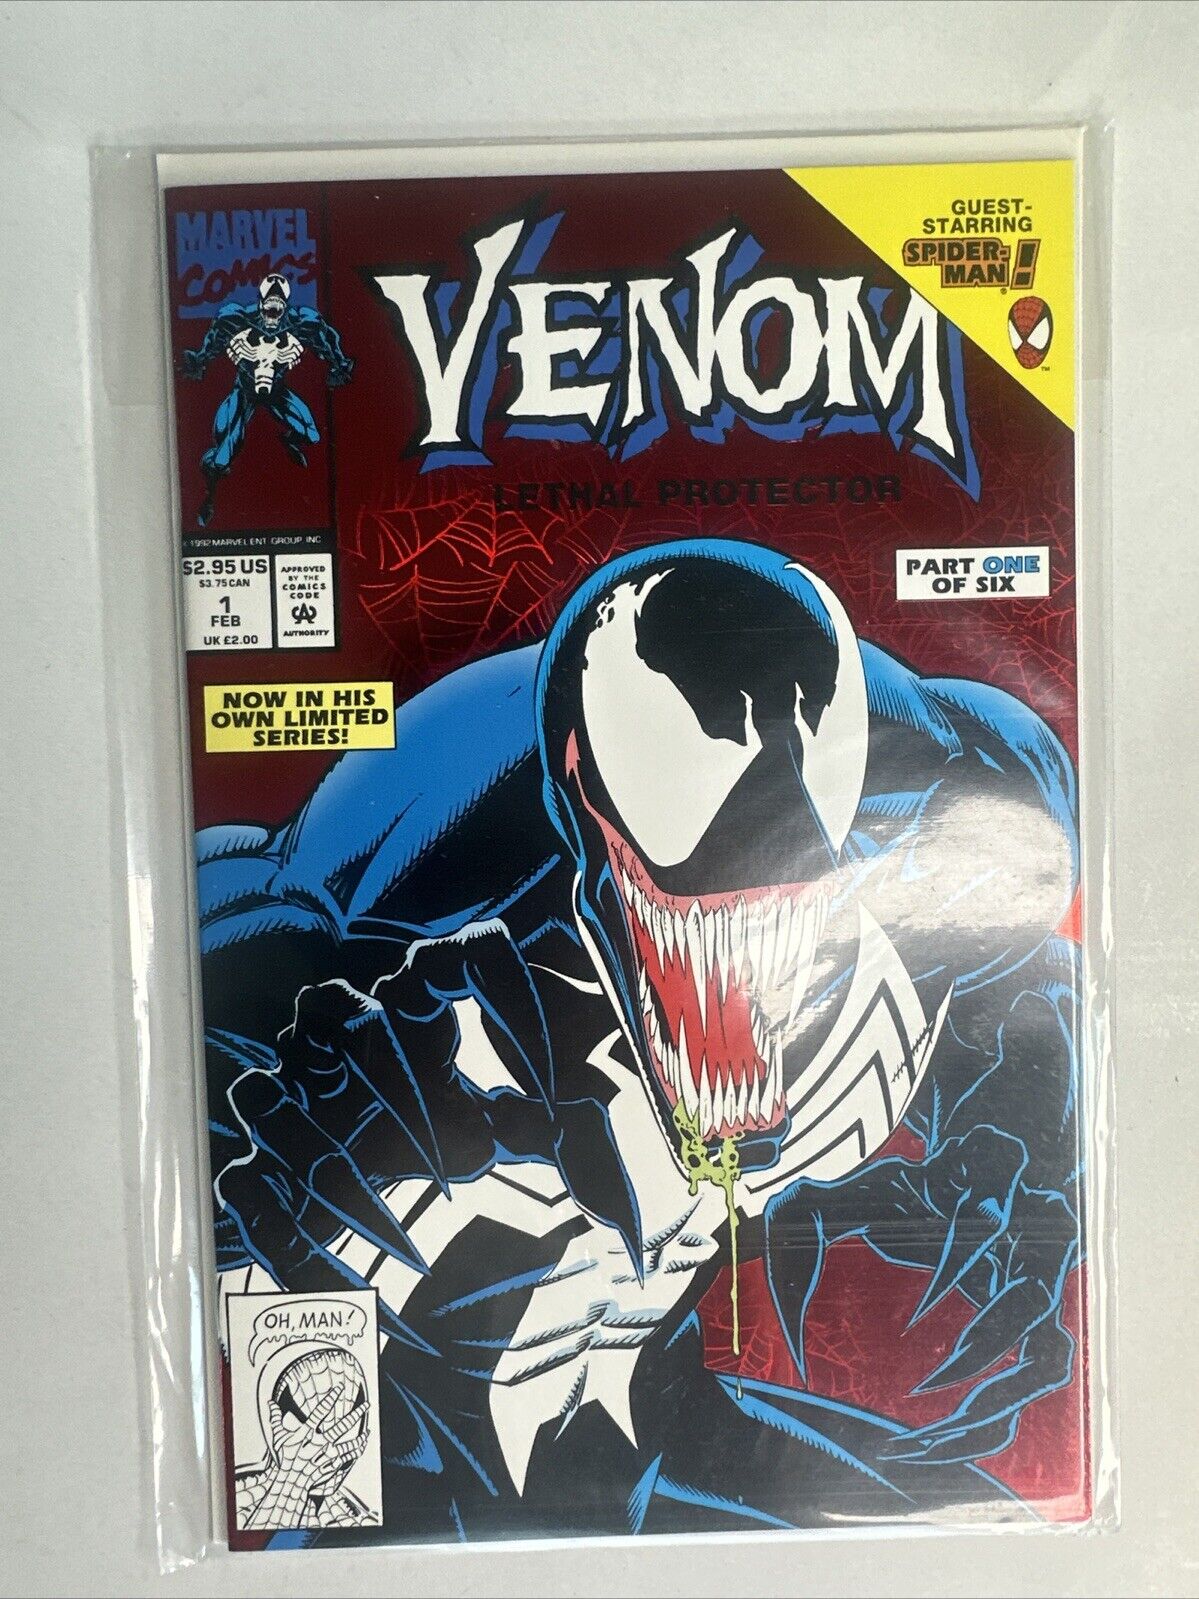 Venom: Lethal Protector #1 (Marvel Comics May 1993) - Very Good Condition